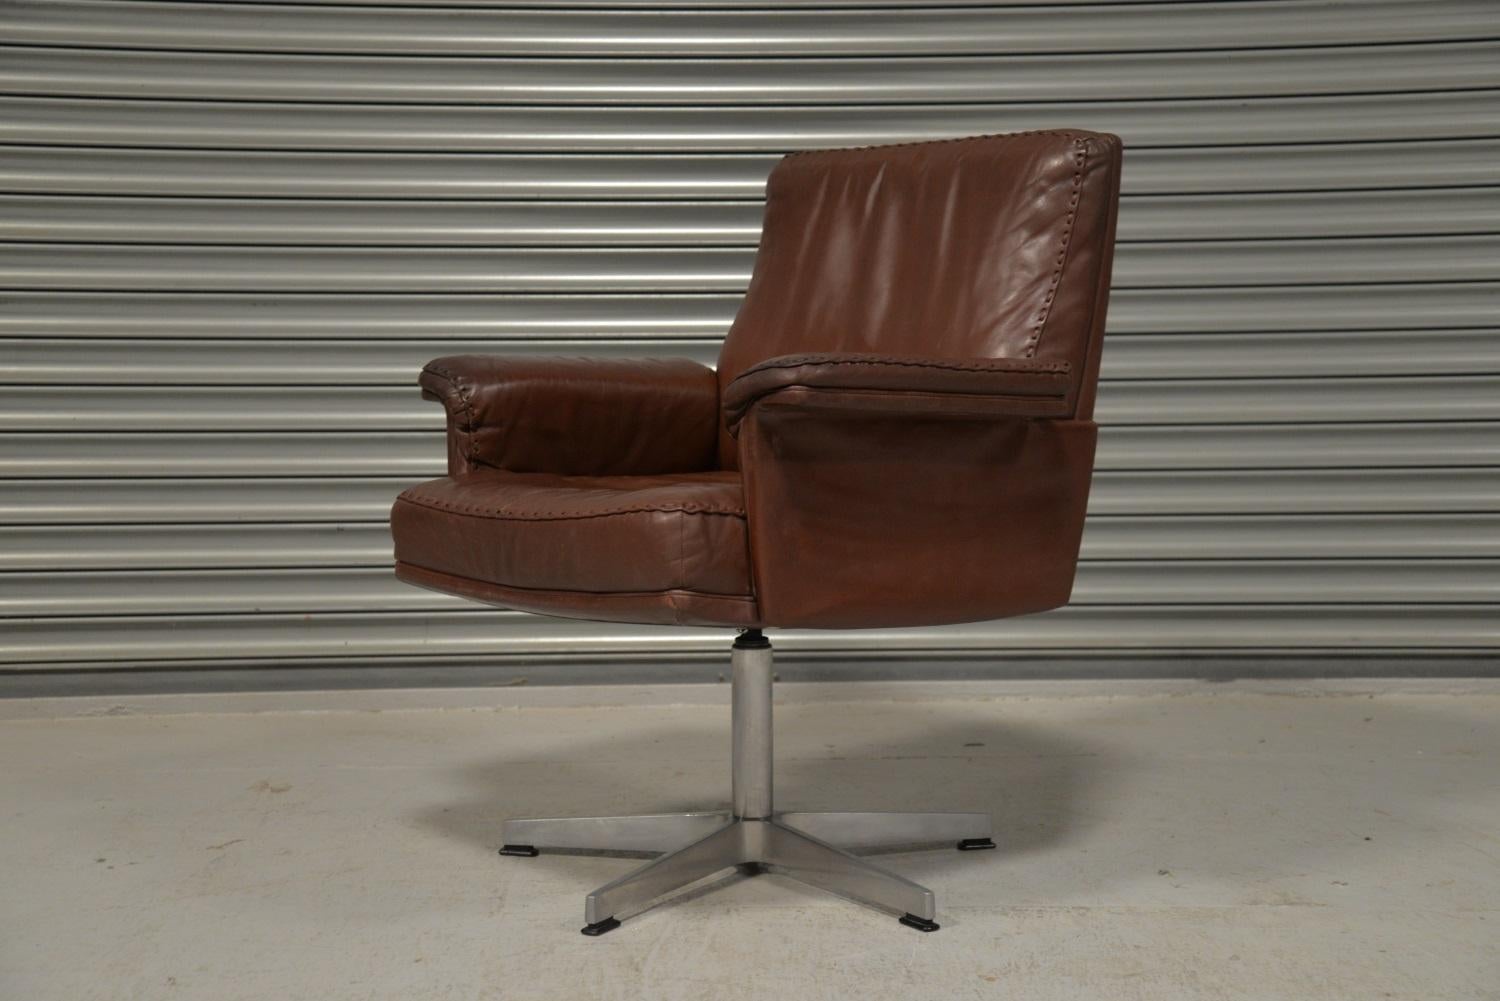 We are delighted to bring to you an extremely rare vintage De Sede DS 35 executive swivel armchair. Hand built in the 1960s to incredibly high standards by de Sede craftsman in Switzerland. The iconic swivel armchair is upholstered in stunning soft